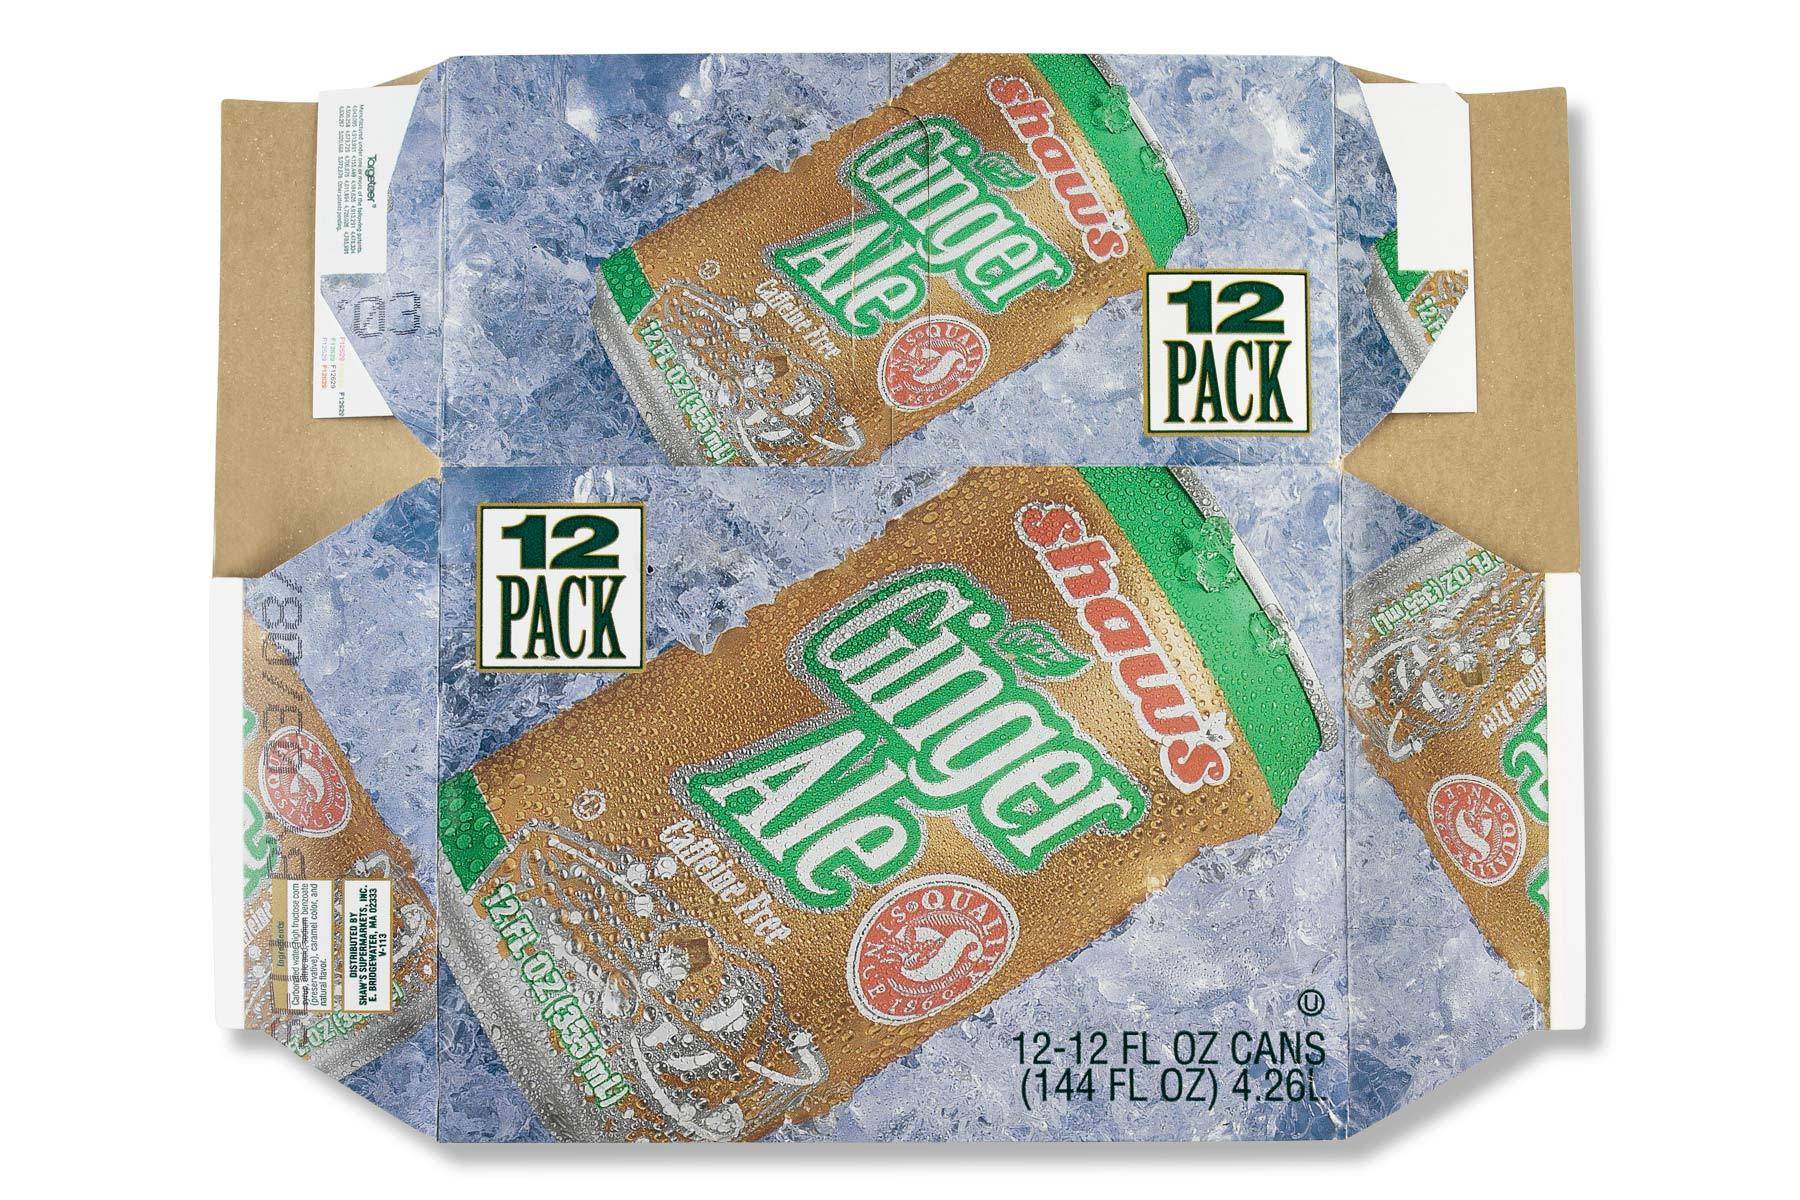 Shaw's Ginger Ale Packaging